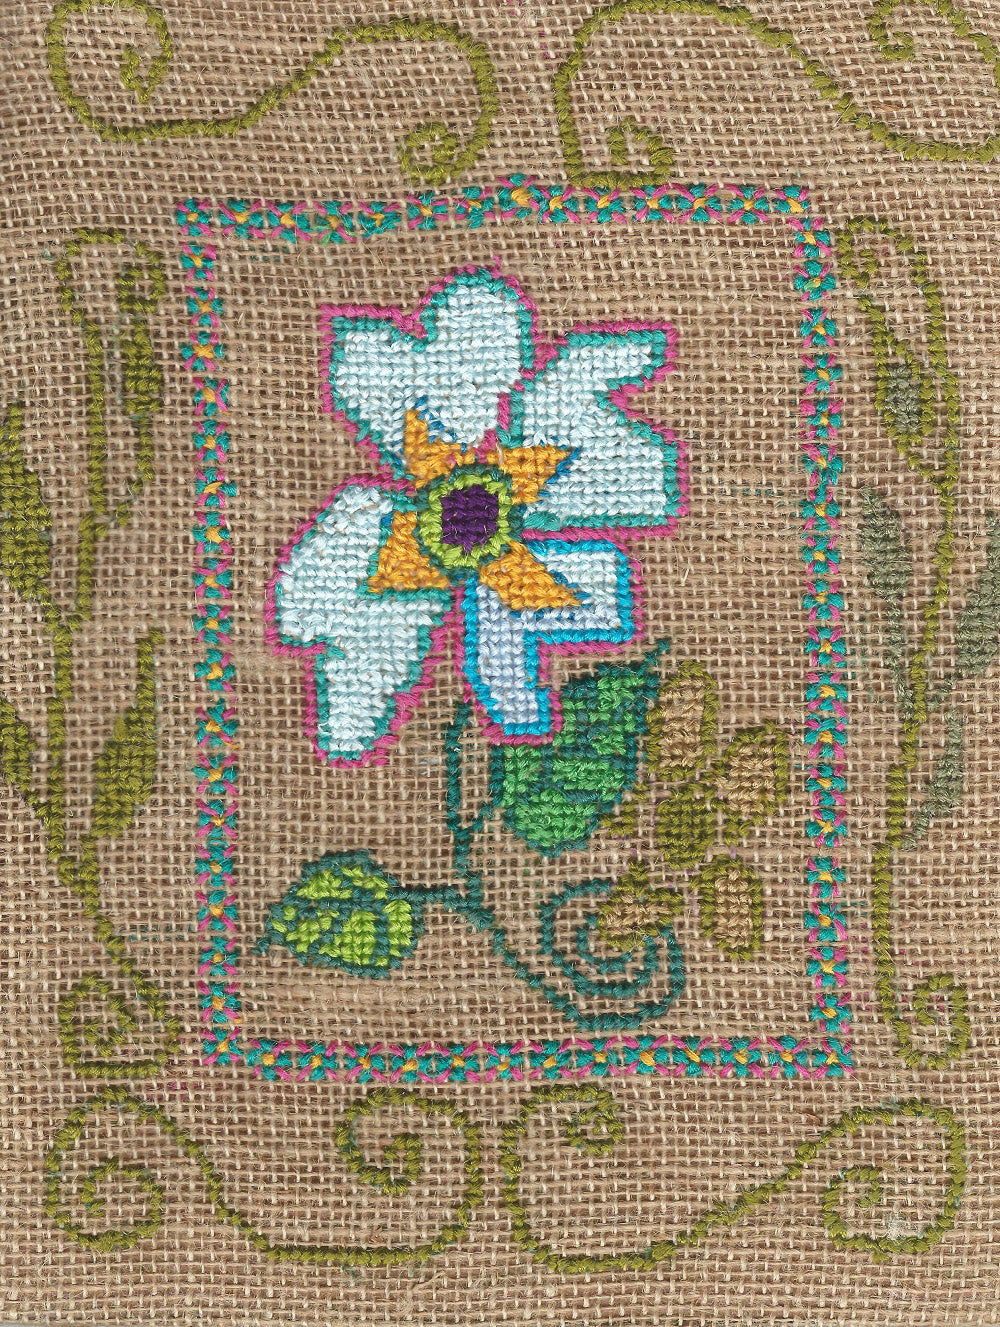 The original art is 8.5 x 11 inches, cross stitch on burlap. Inspired by a tint blue Forget Me Not Blossom. 